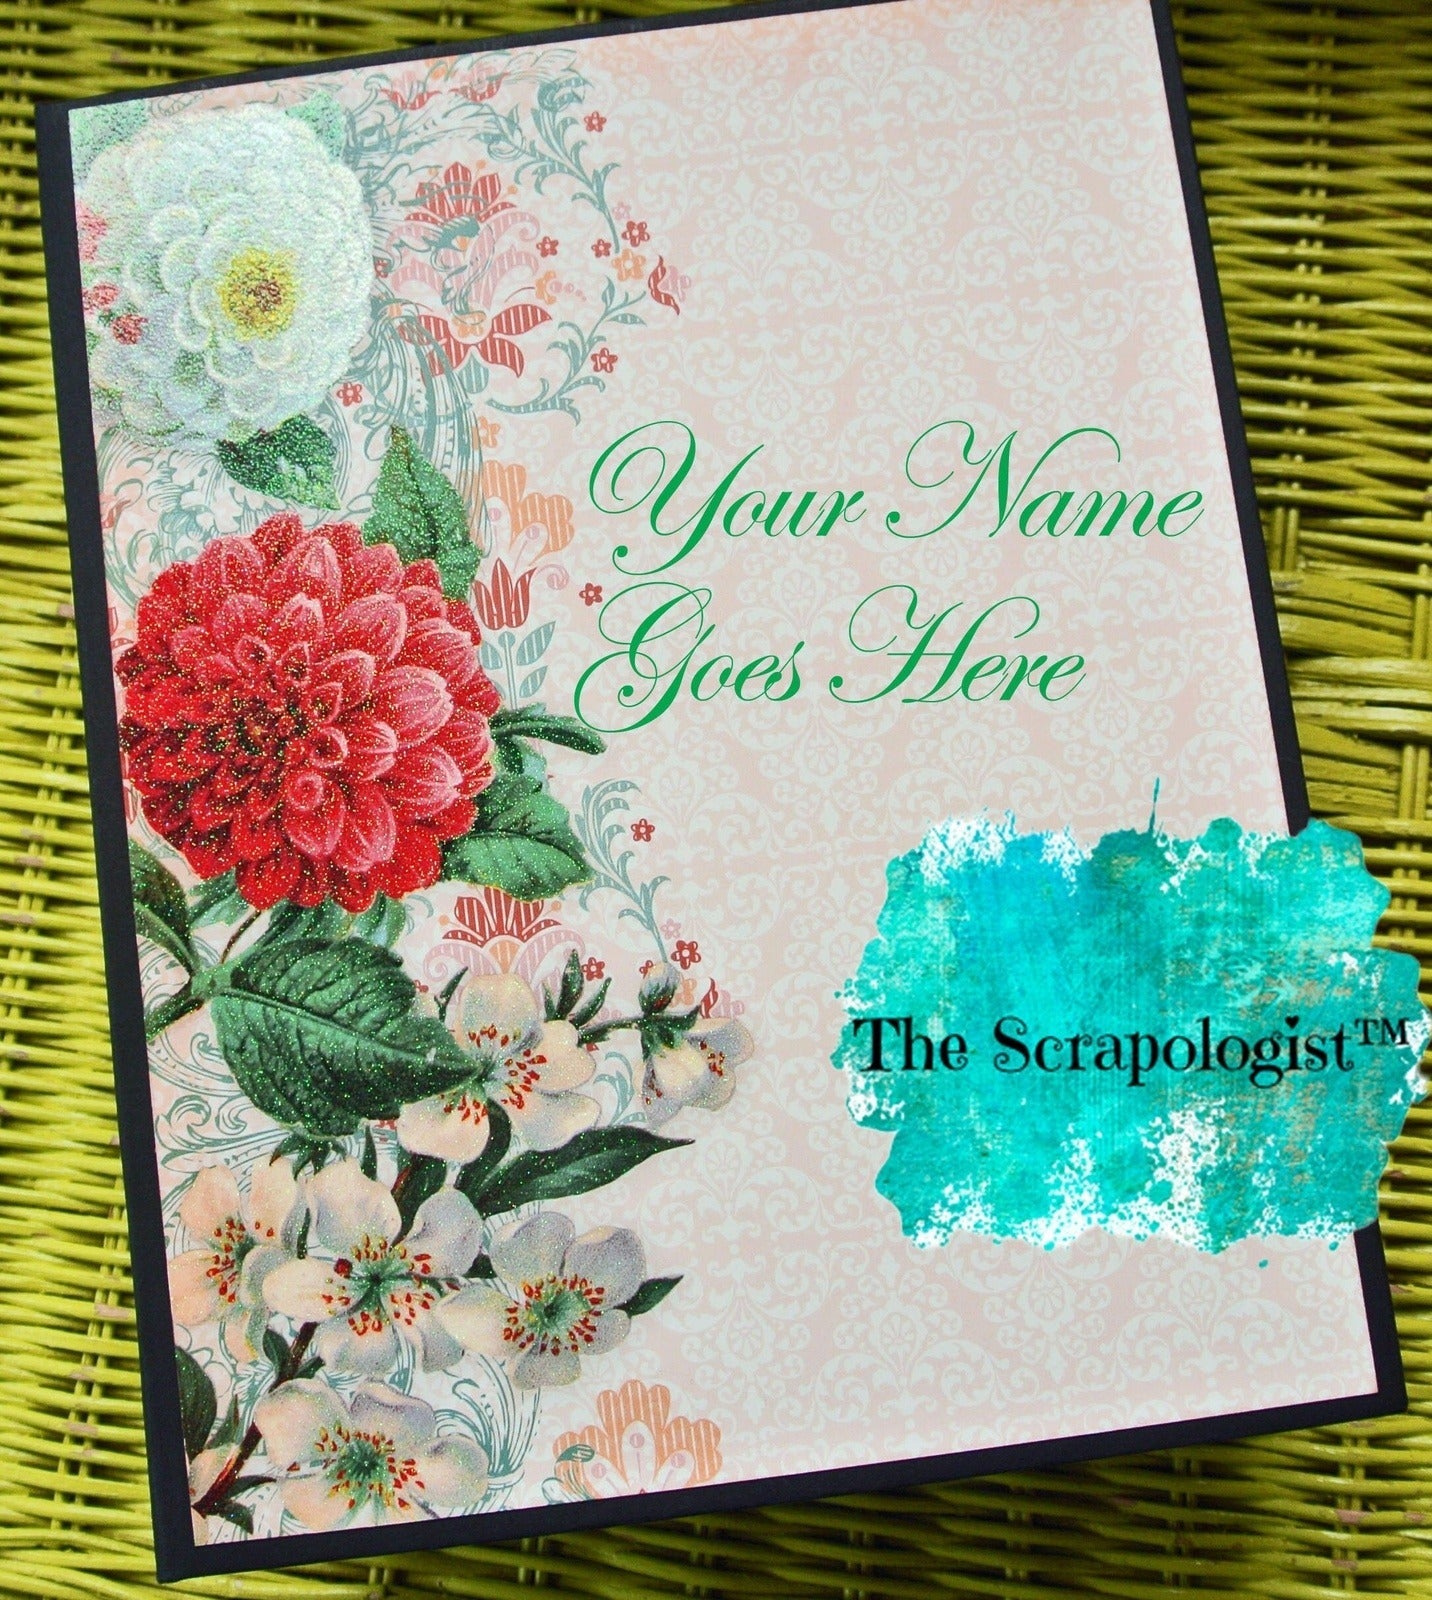 Wedding Photo Album or Special Occasion Memory Book, Personalized Mini Album, Custom Scrapbook, with Your Name on the Cover